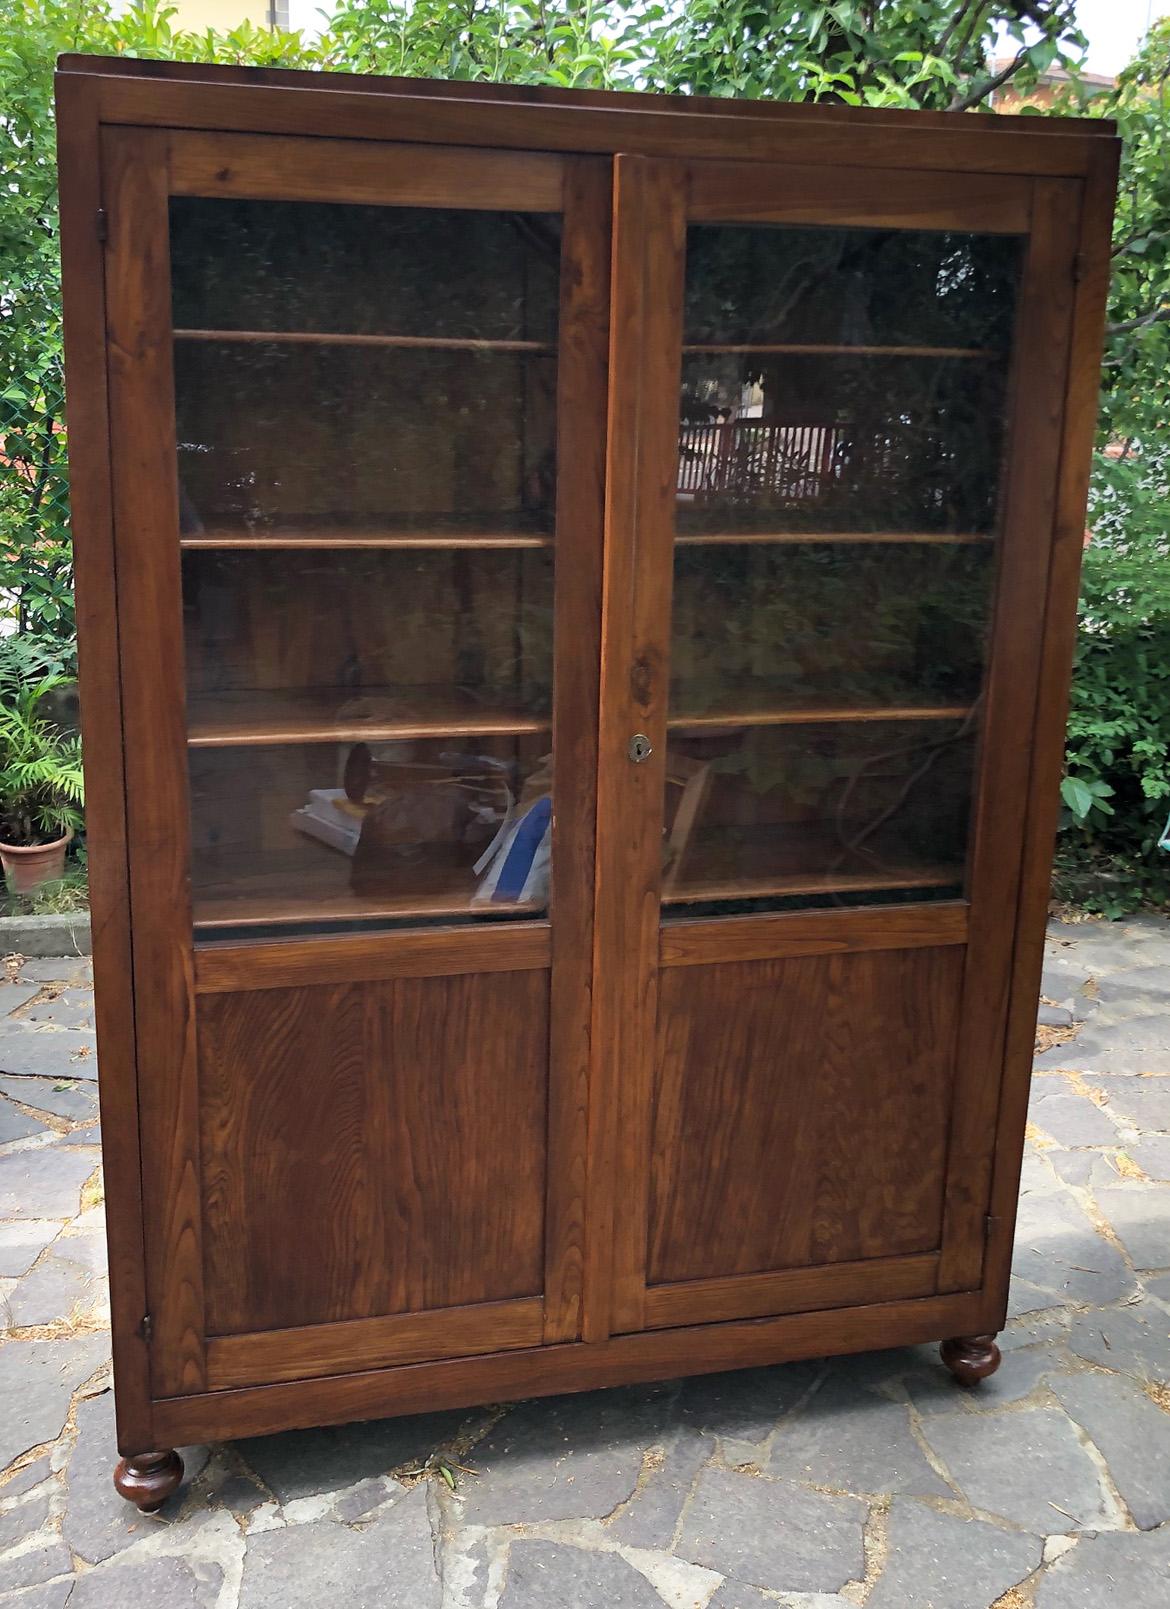 Showcase bookcase in Italian solid chestnut, original from 1930, with internal shelves.
Comes from an old country house in the Garfagnana area of Tuscany.
The paint is original in patina, honey amber color. 
As shown in the photographs and